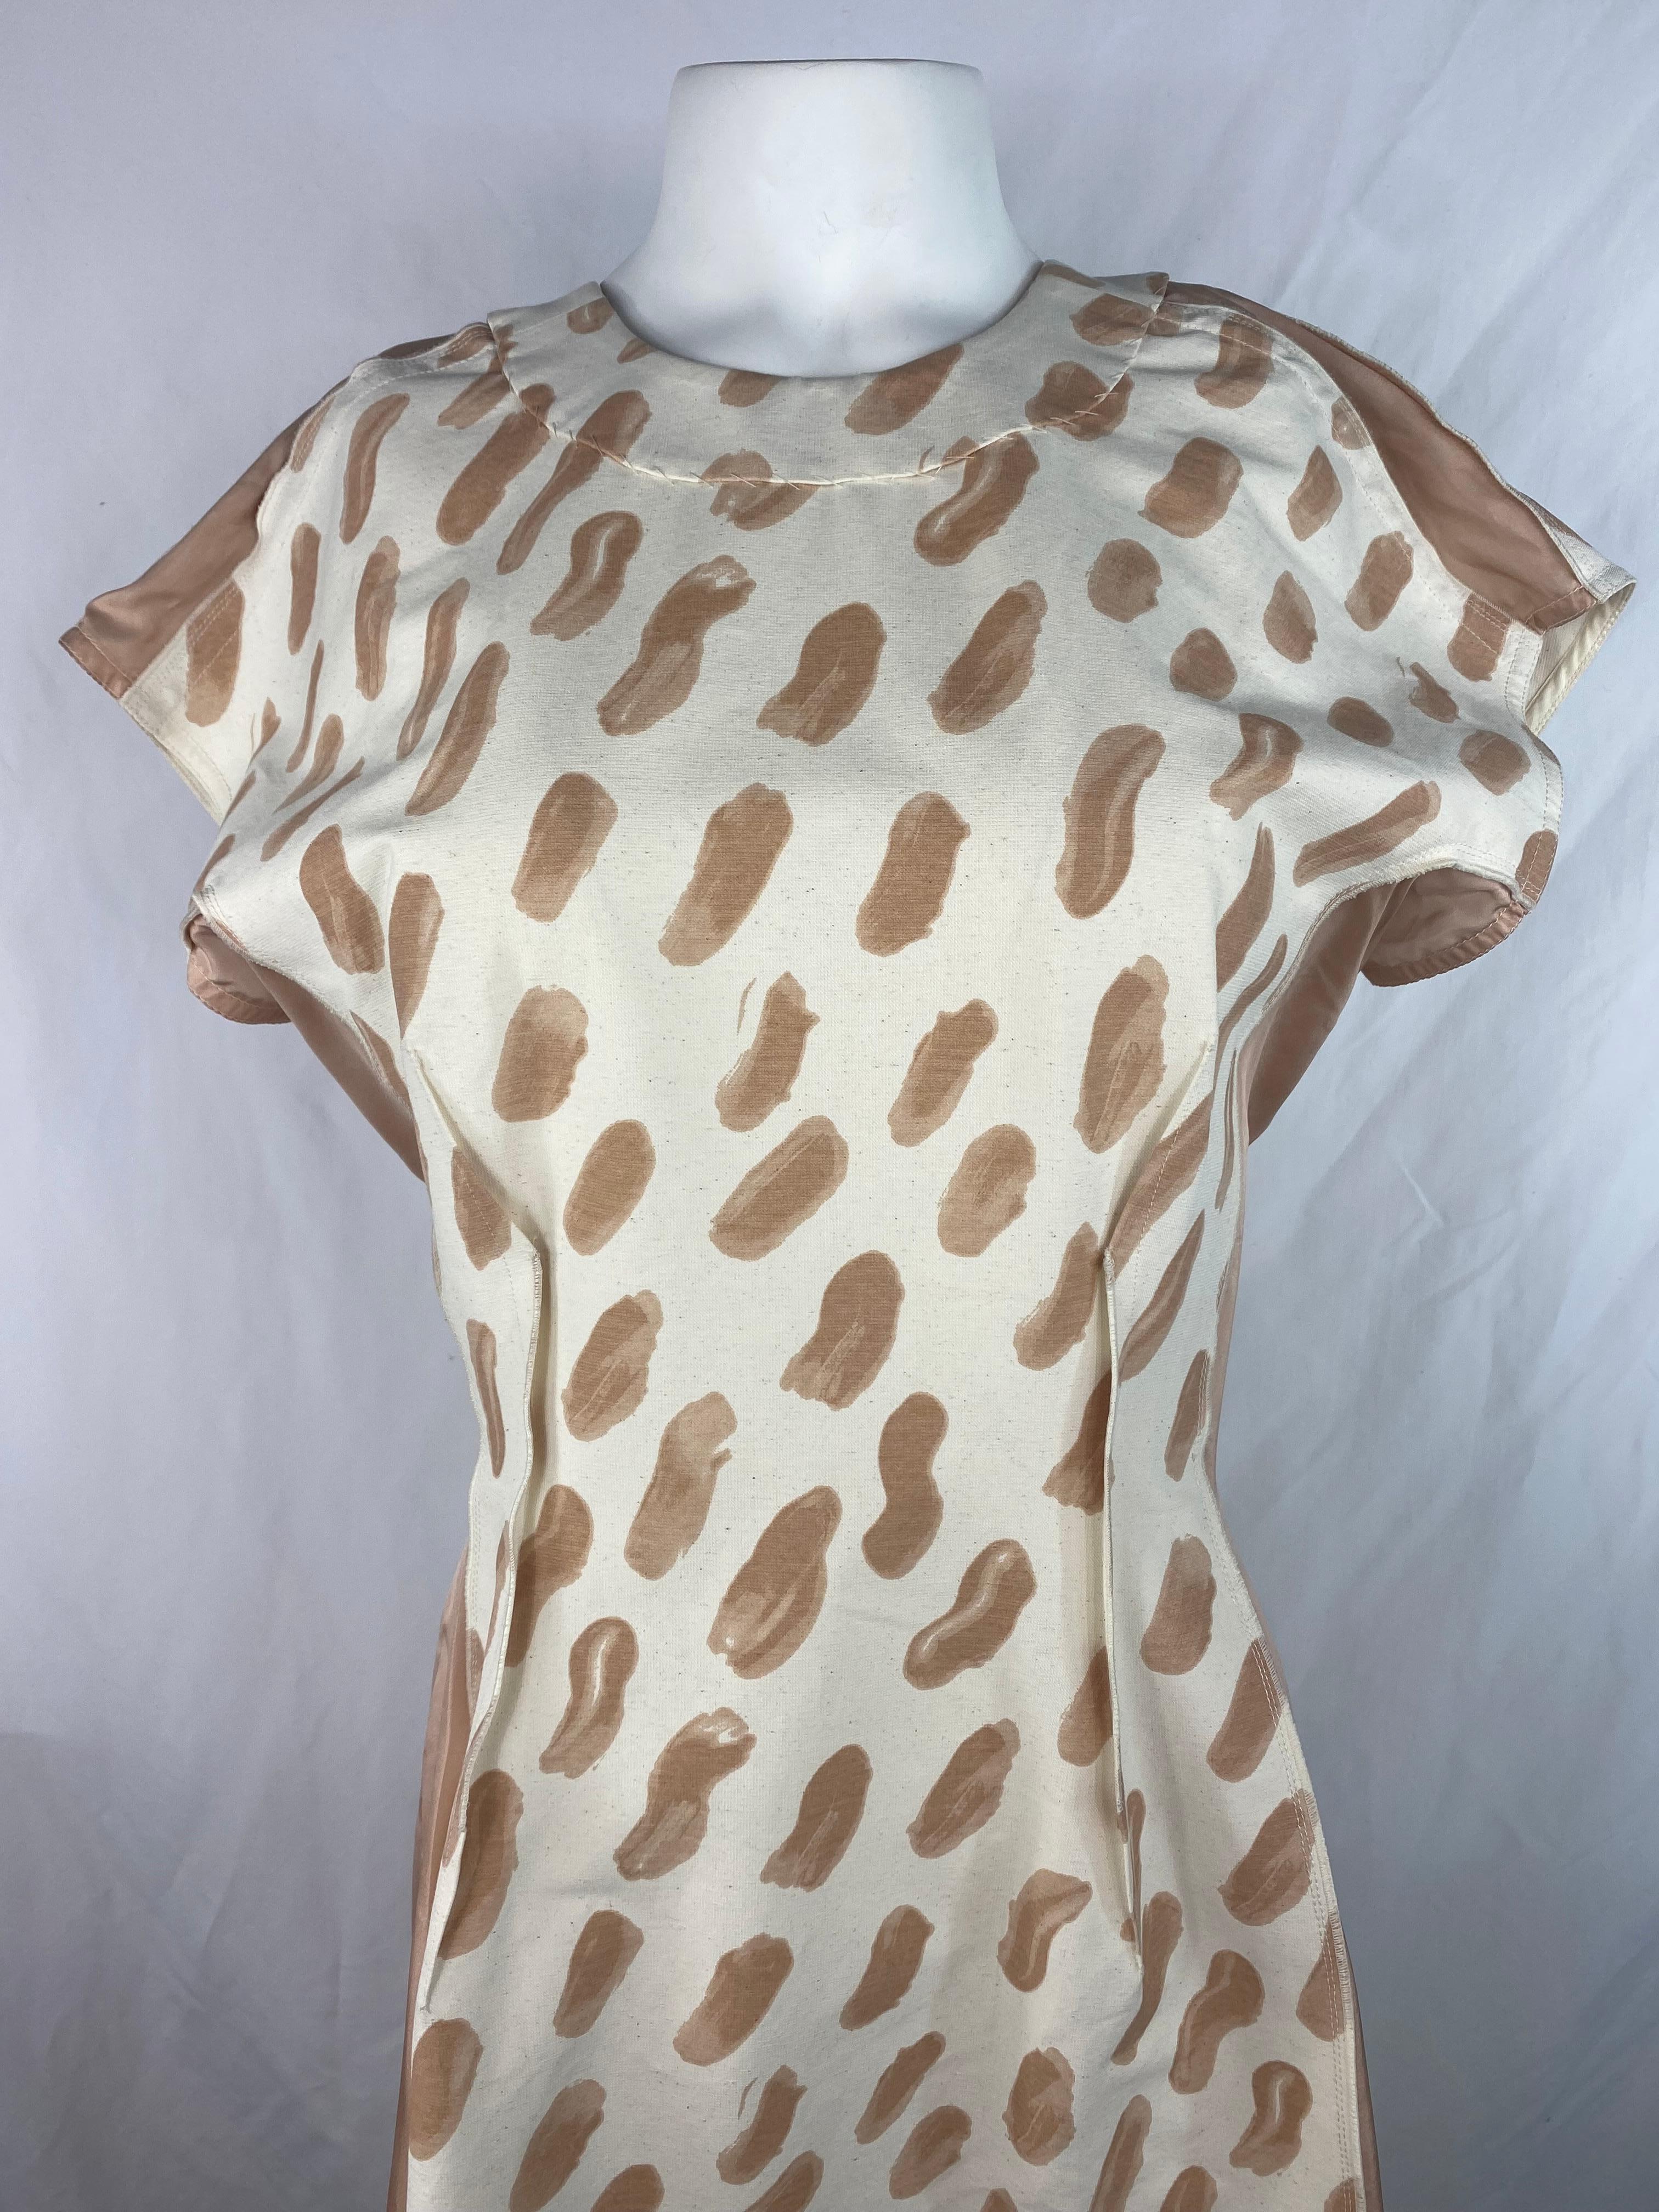 Product details:

The dress features white, cream and beige colors with abstract brush stork print, crew neck line folded bottom detail and rear silver tone zip closure.